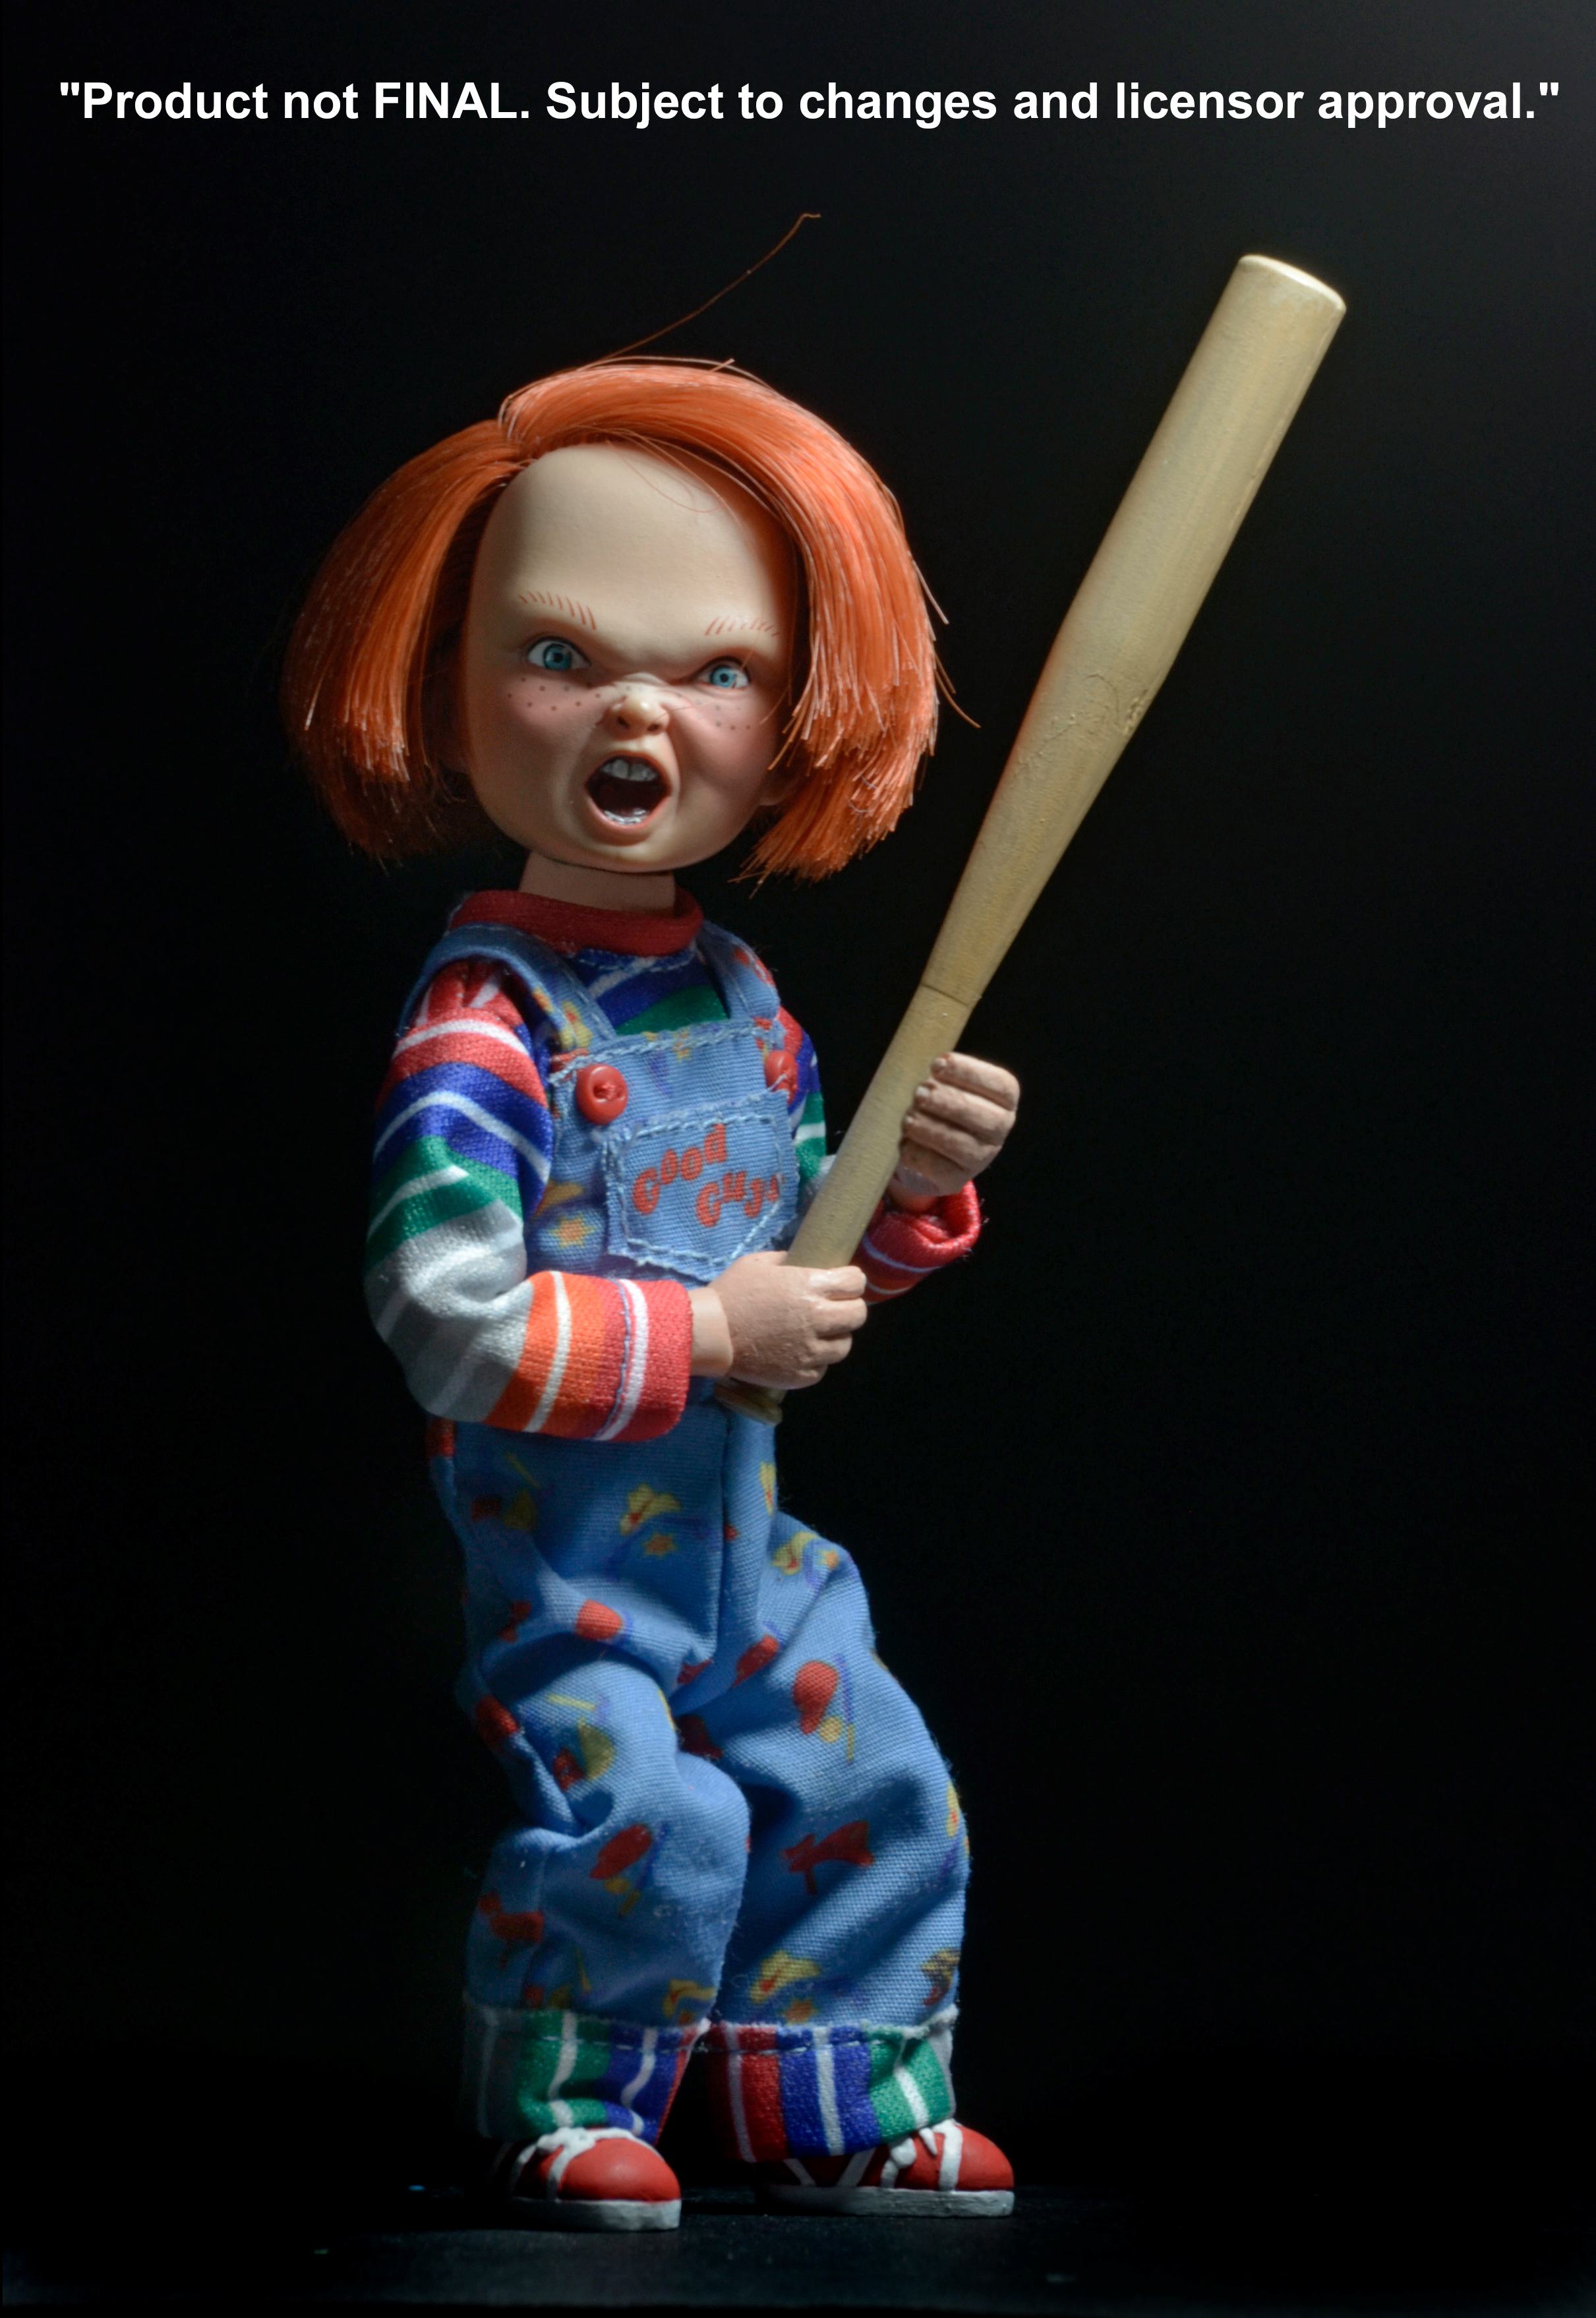 Childs-Play-Chucky-8-Inch-Cloth-Retro-Action-Figure-07